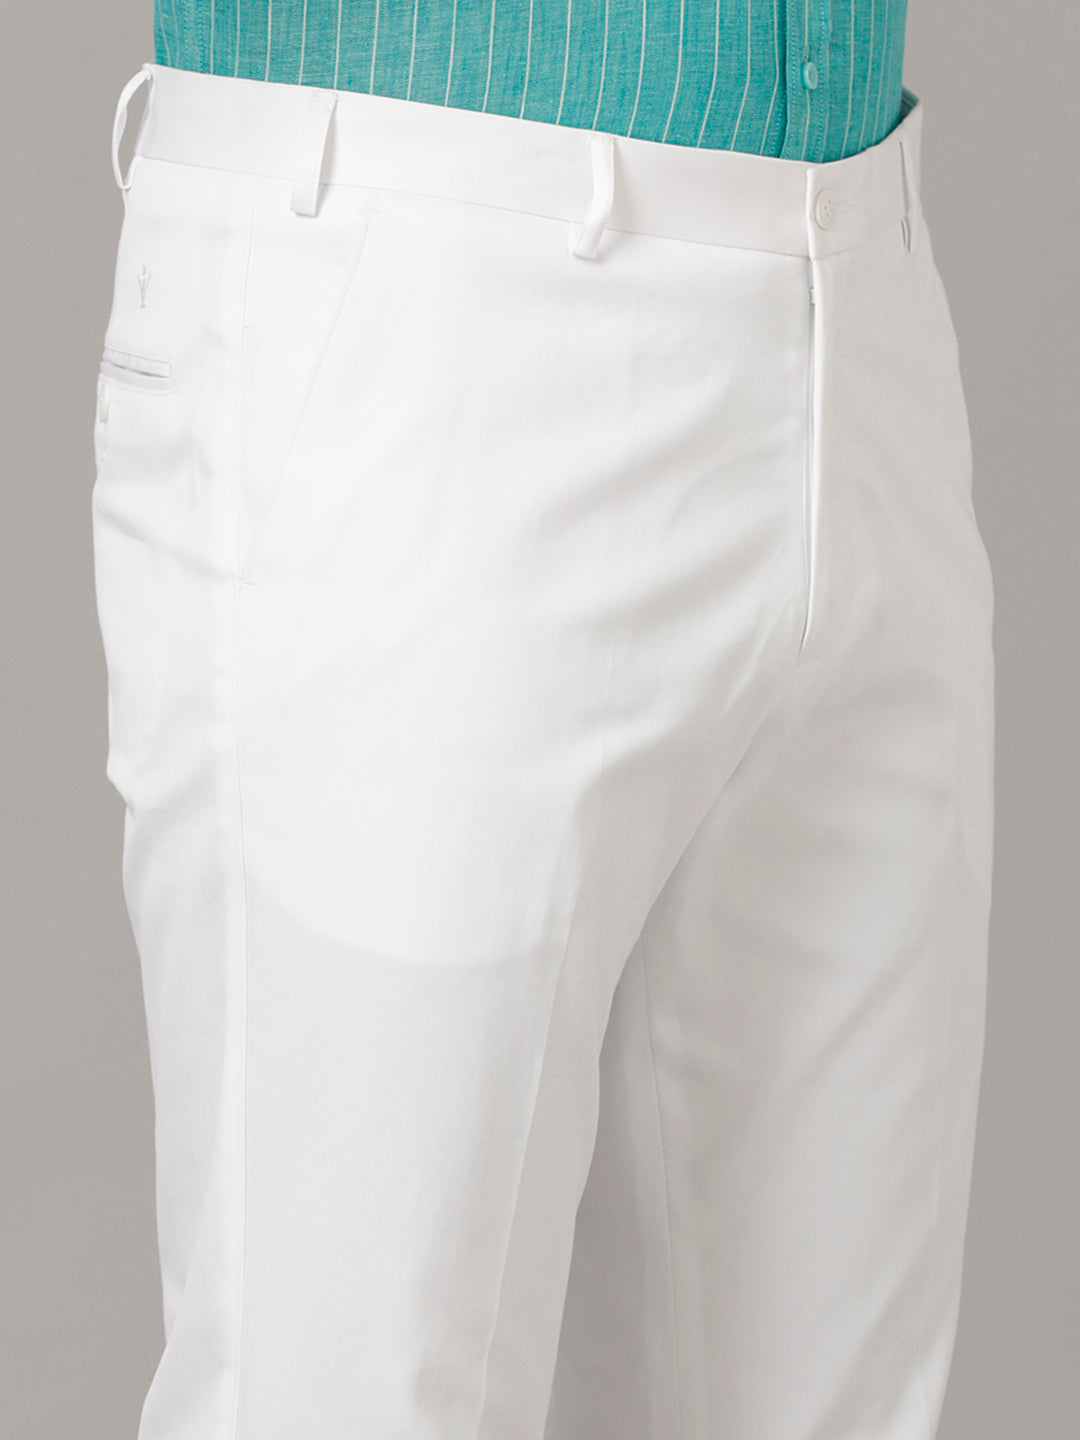 Mens Regular Fit Cotton White Pants Easy Care-Zoom view